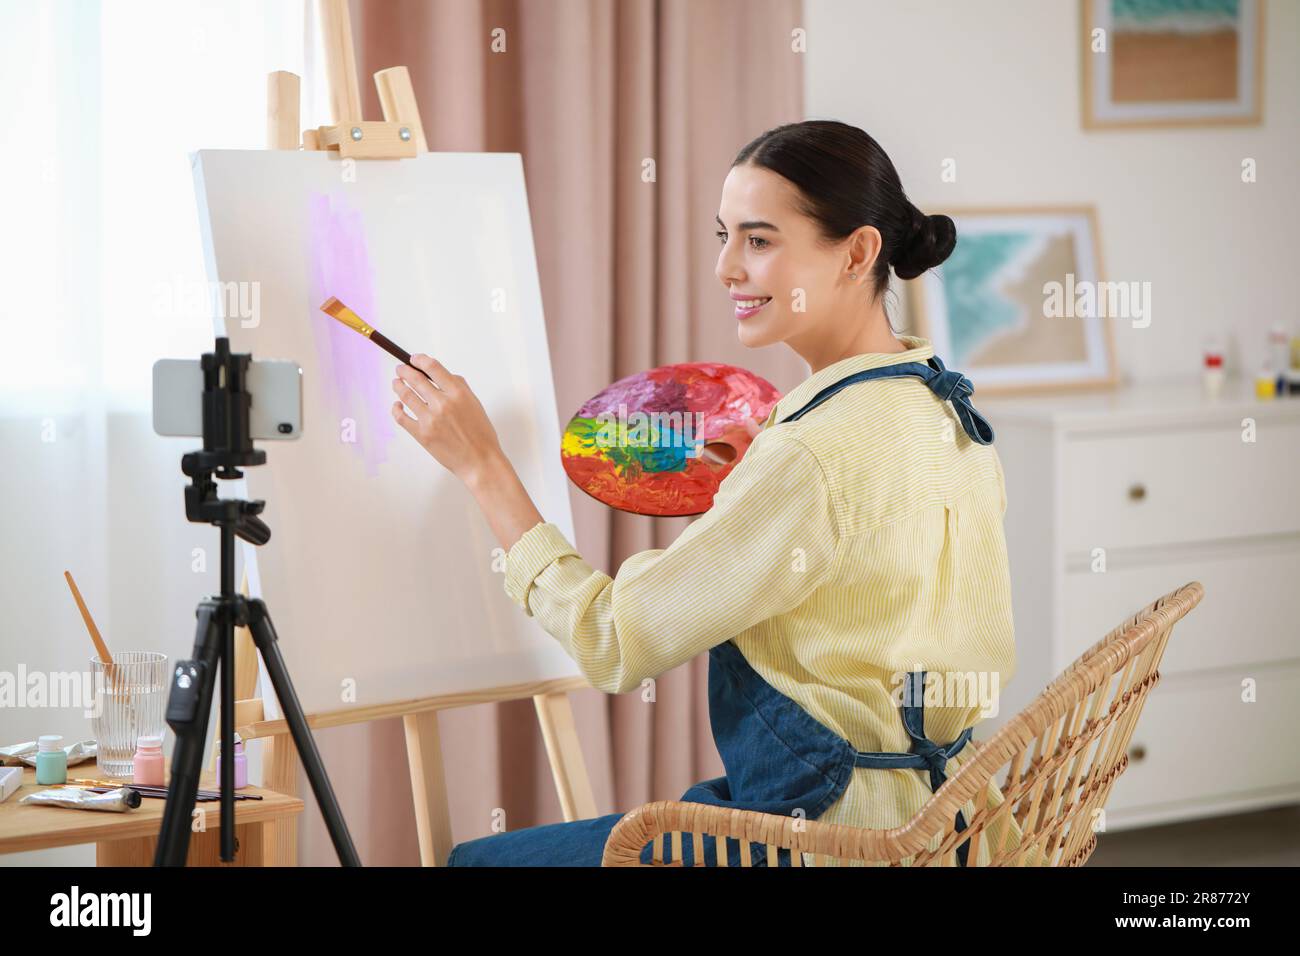 Teacher conducting online painting lesson at home. Time for hobby Stock Photo